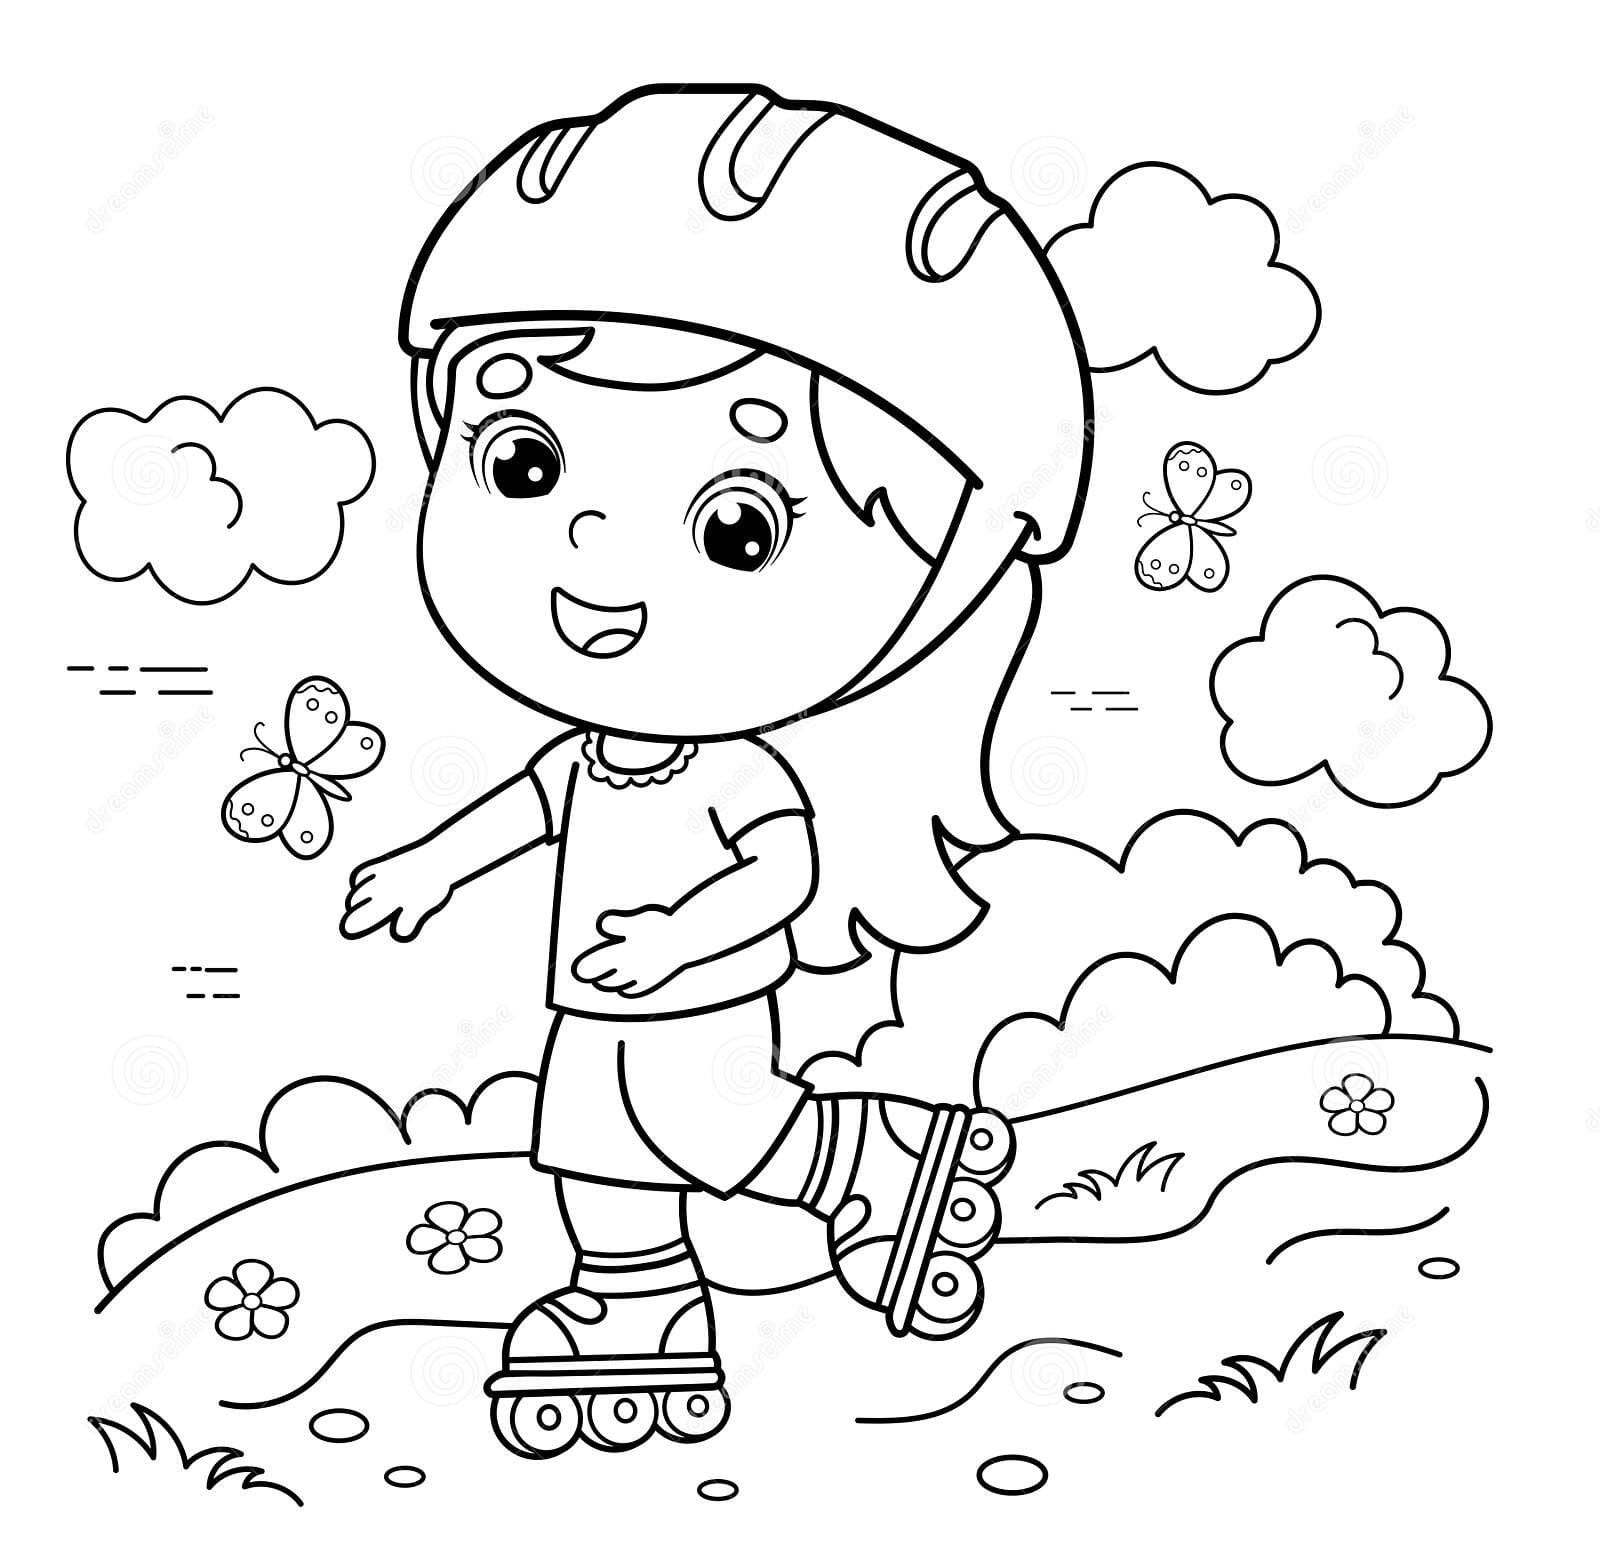 A Roller Skate Download Coloring Page